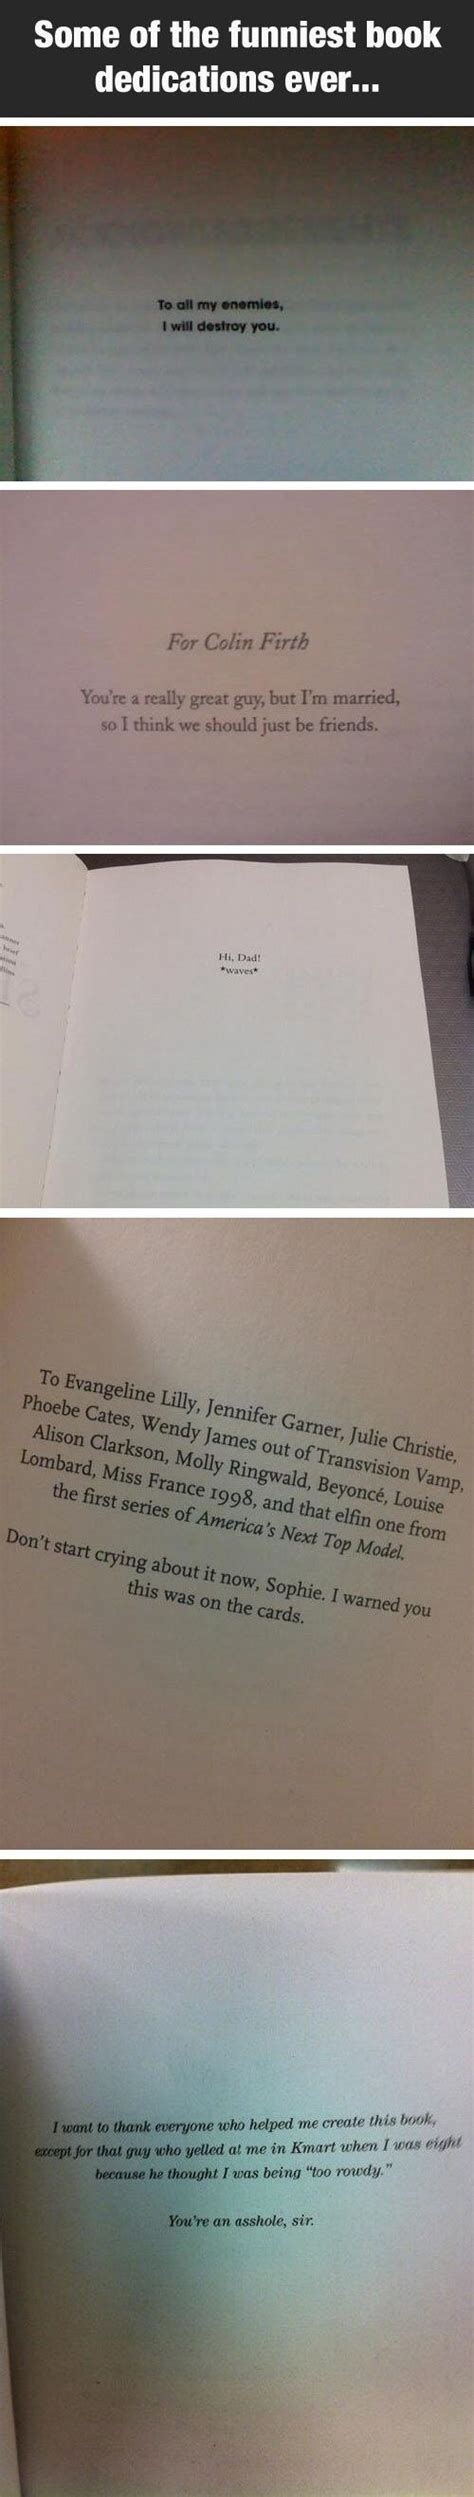 funny book dedications pictures   images  facebook